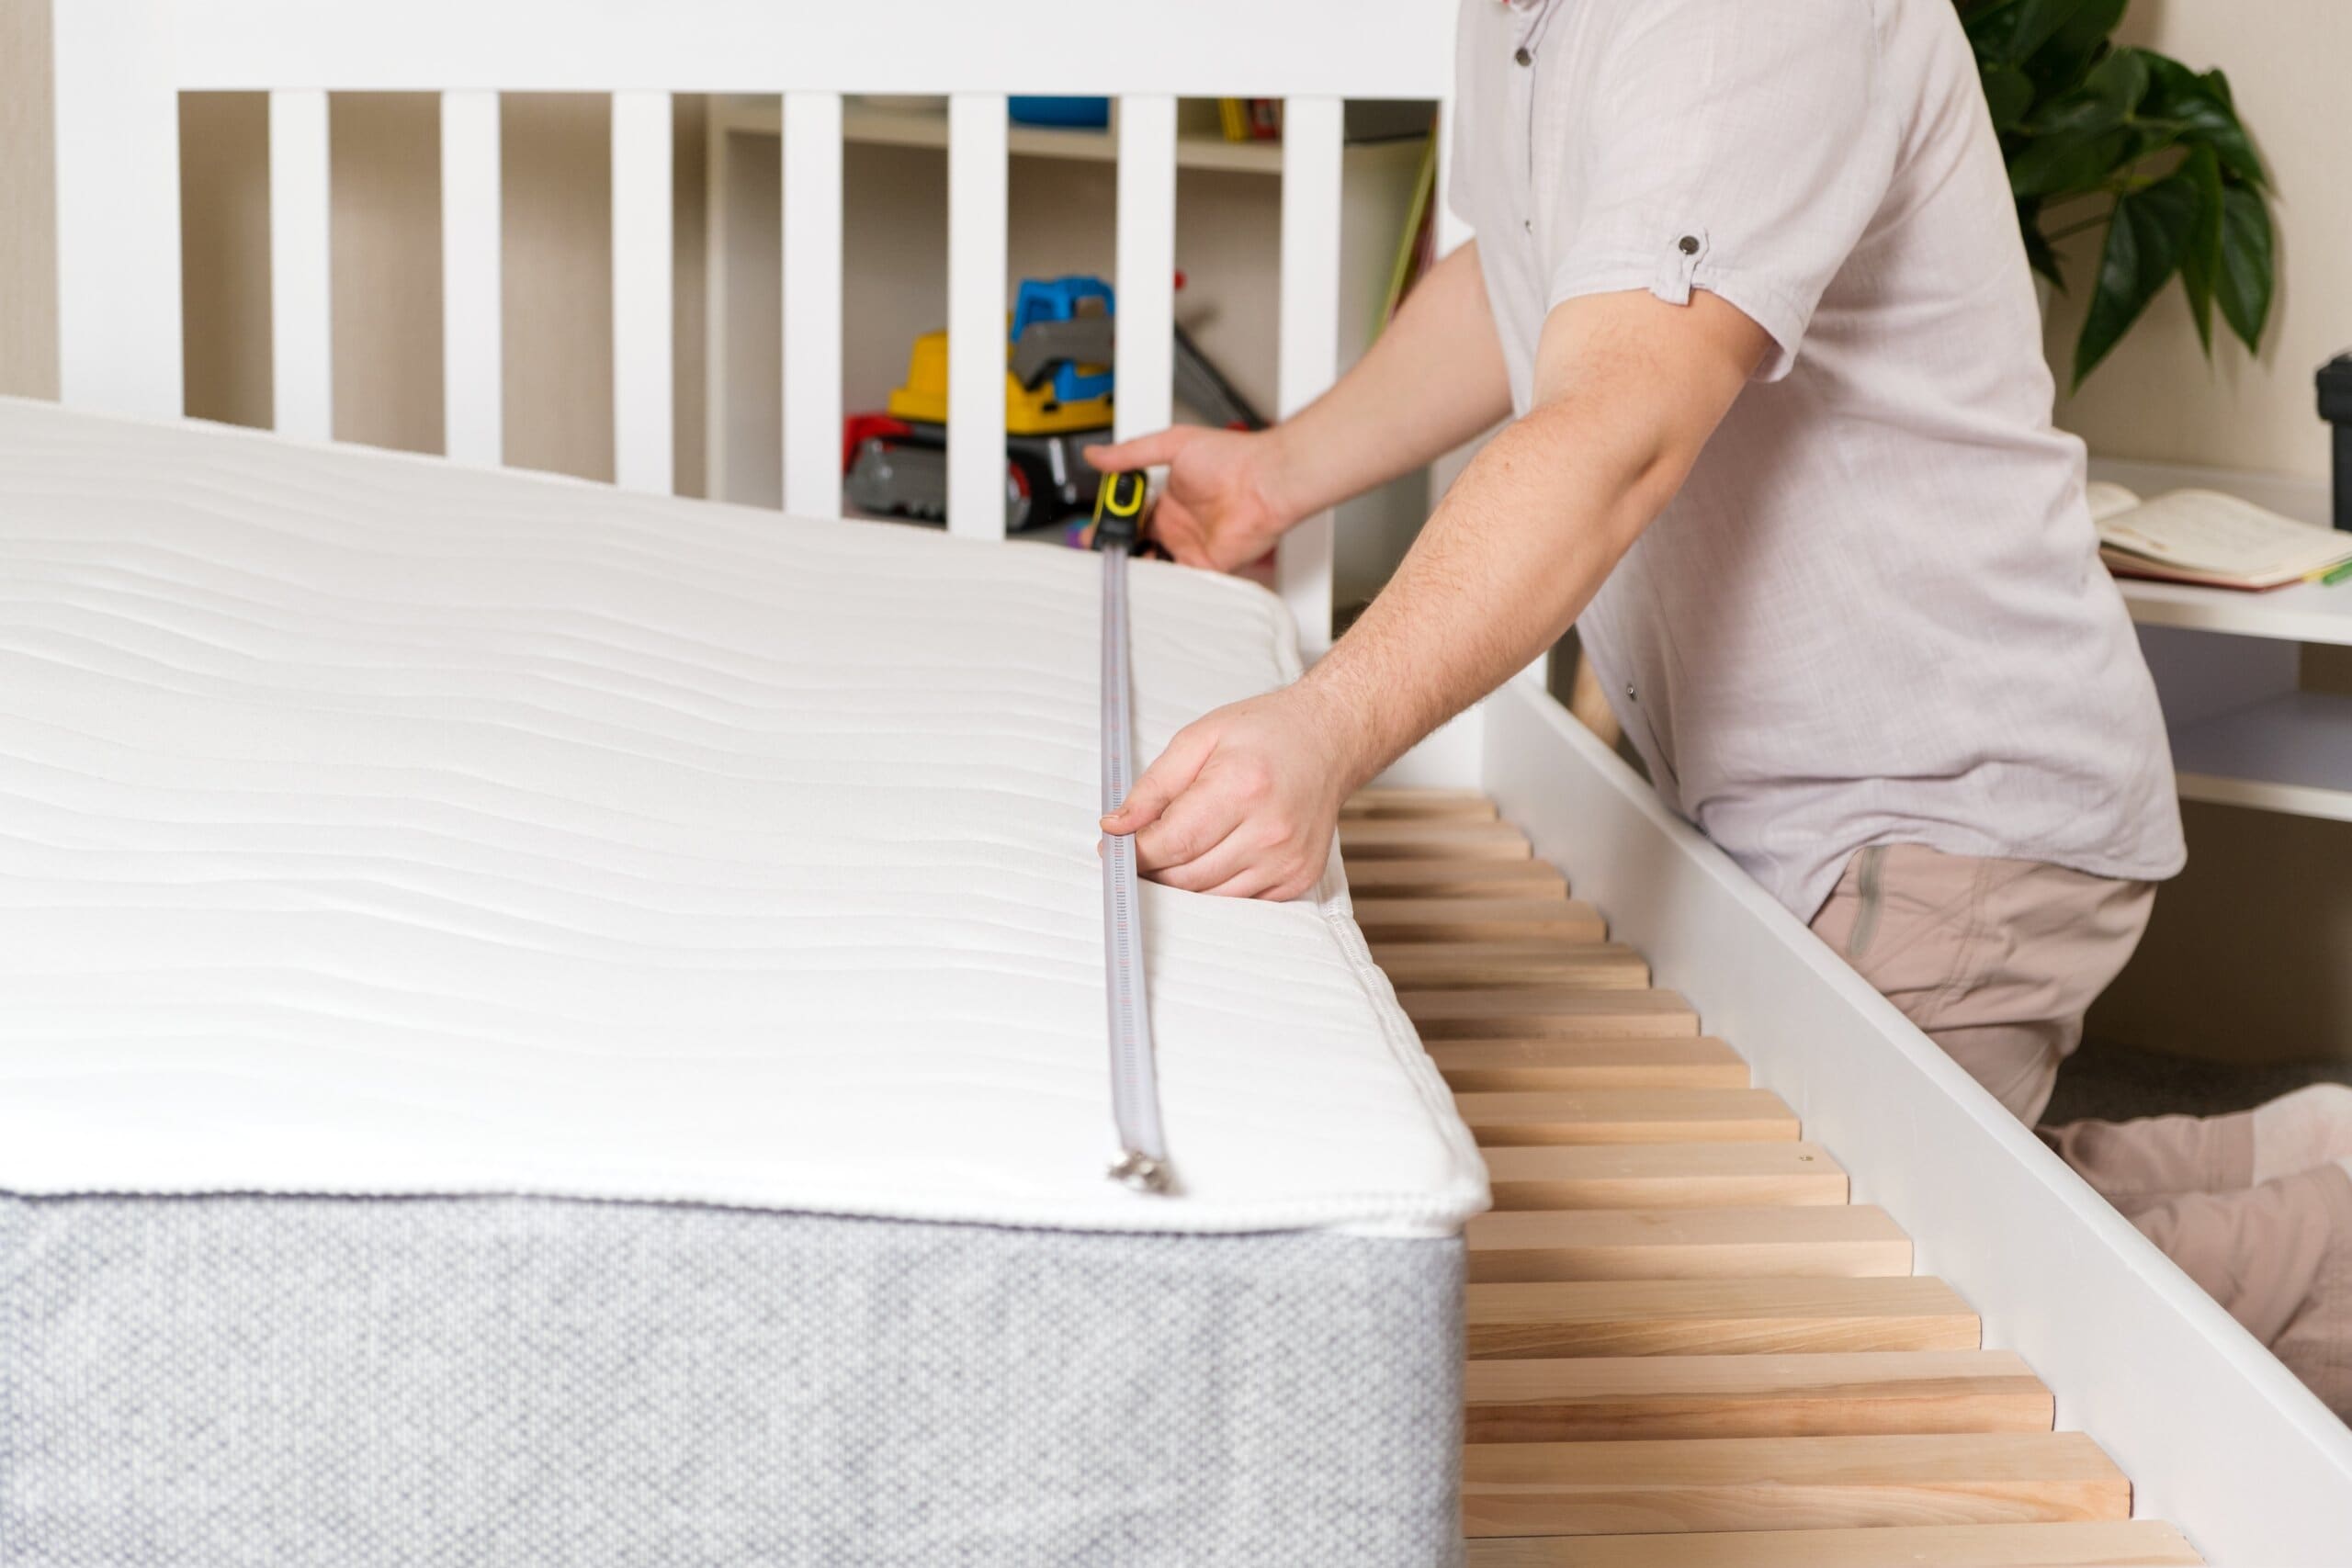 Man using tape measure to measure the length of a mattress sat on a bed frame.